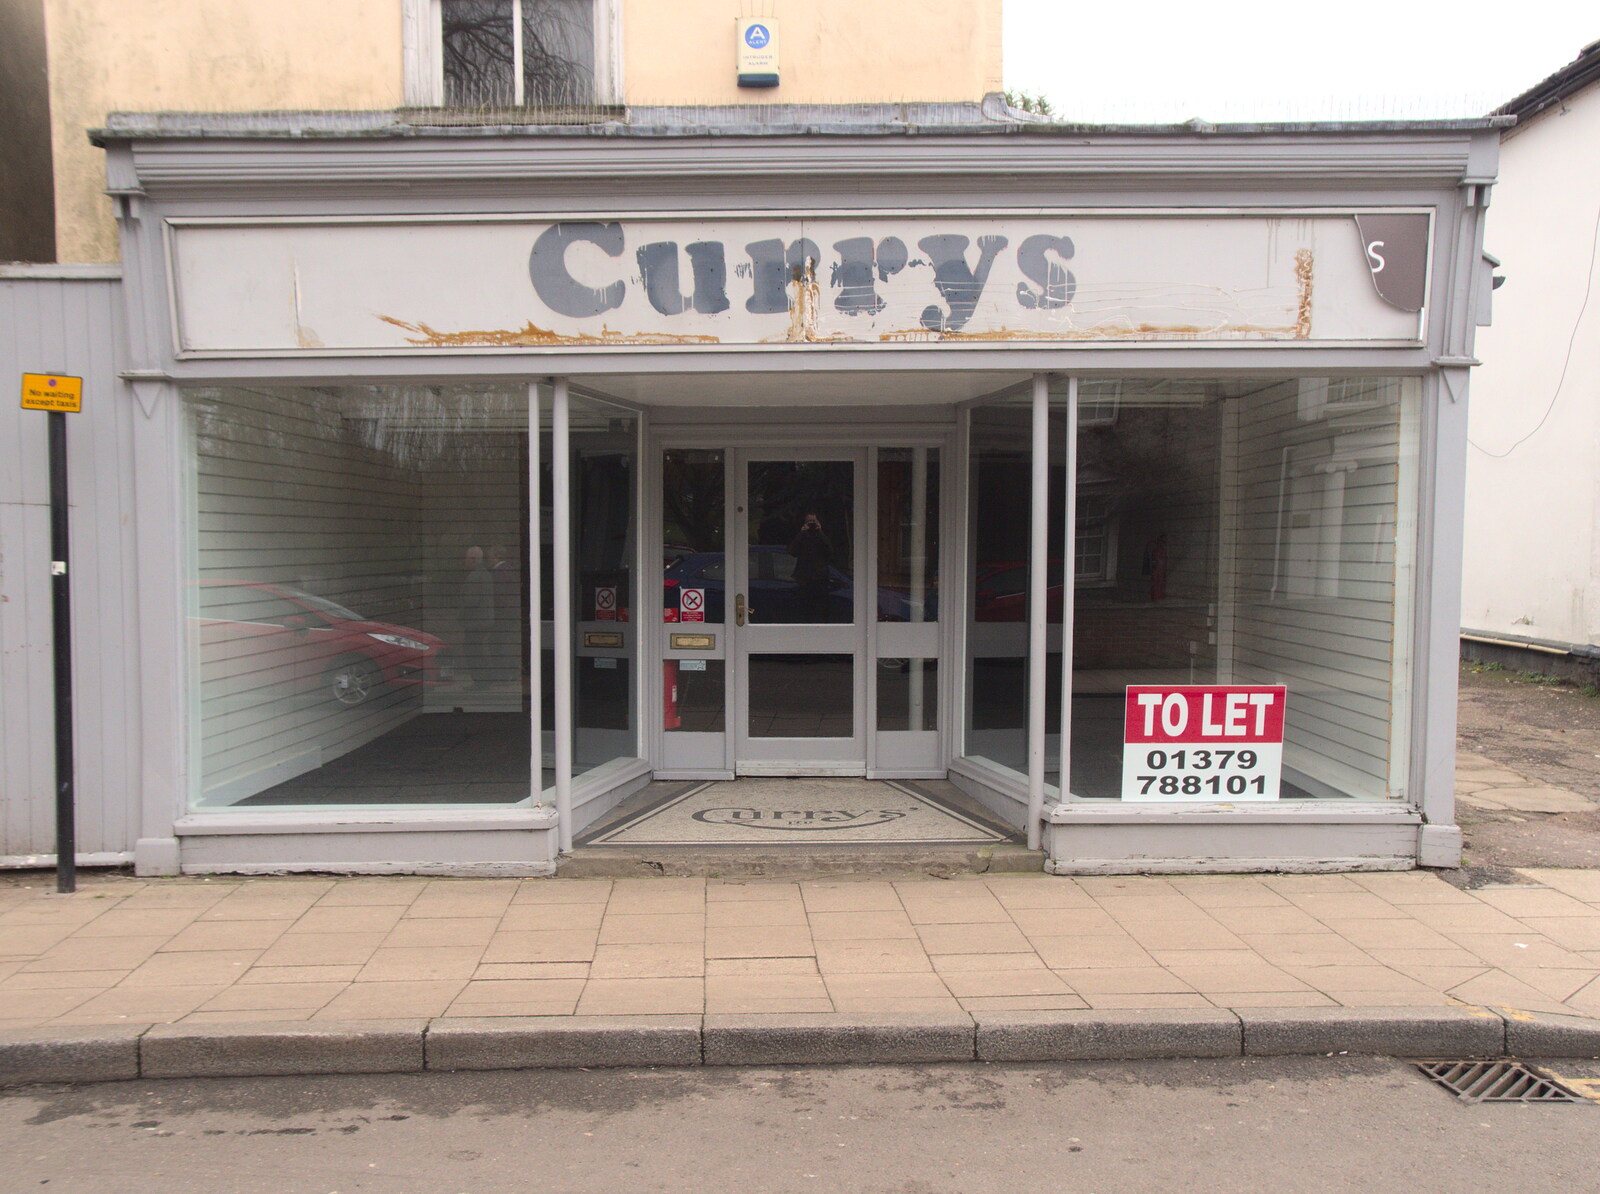 The old Curry's sign re-appears on Mere Street from January Misc: Haircut 100, Diss, Norfolk - 14th January 2018